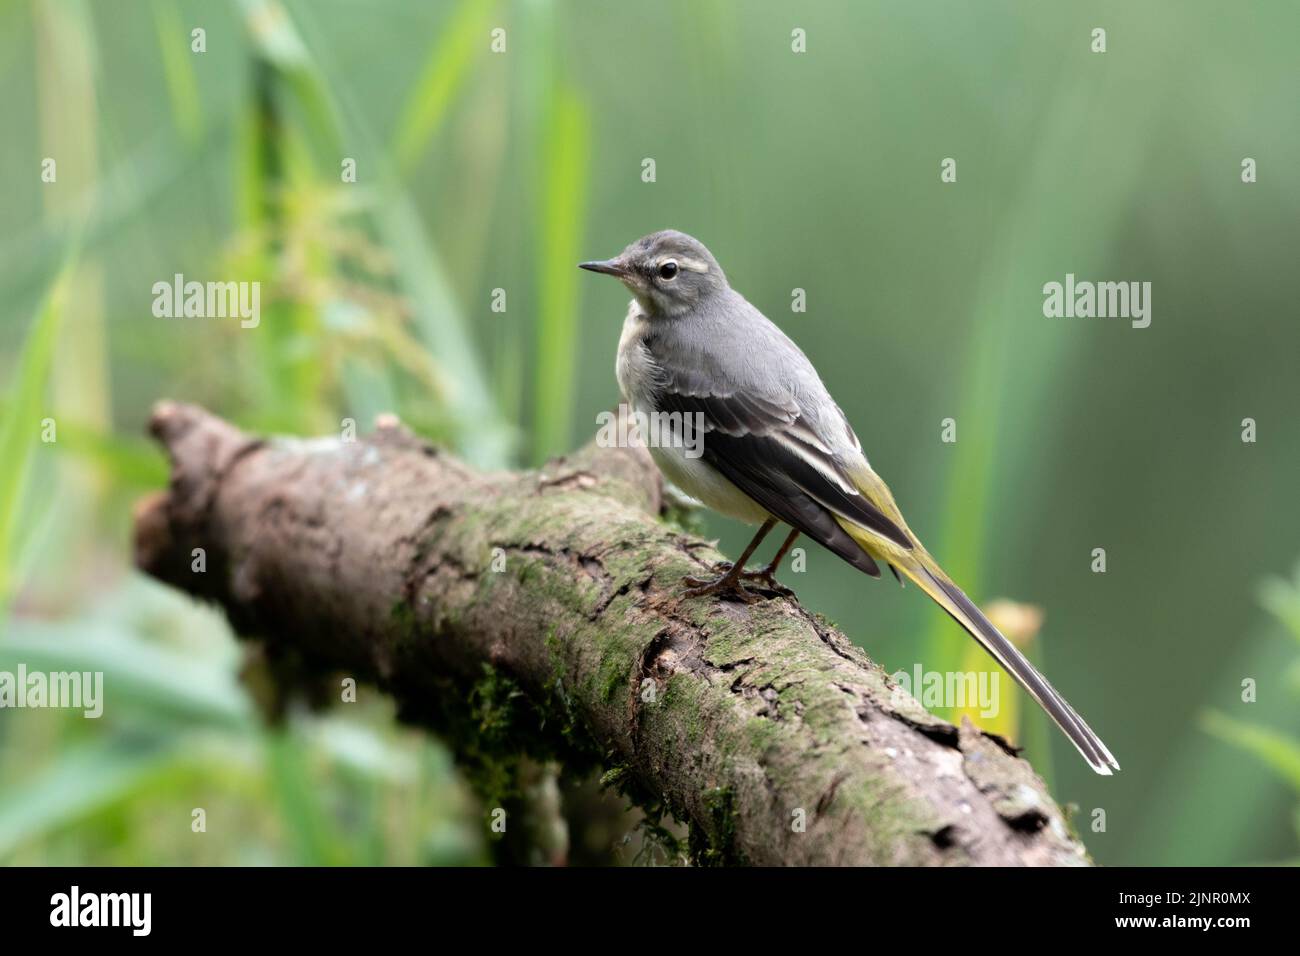 A Grey Wagtail at Magor Marsh in Monmouthshire, Wales, UK. The marsh is drying up highlighting global warming and climate change. Stock Photo